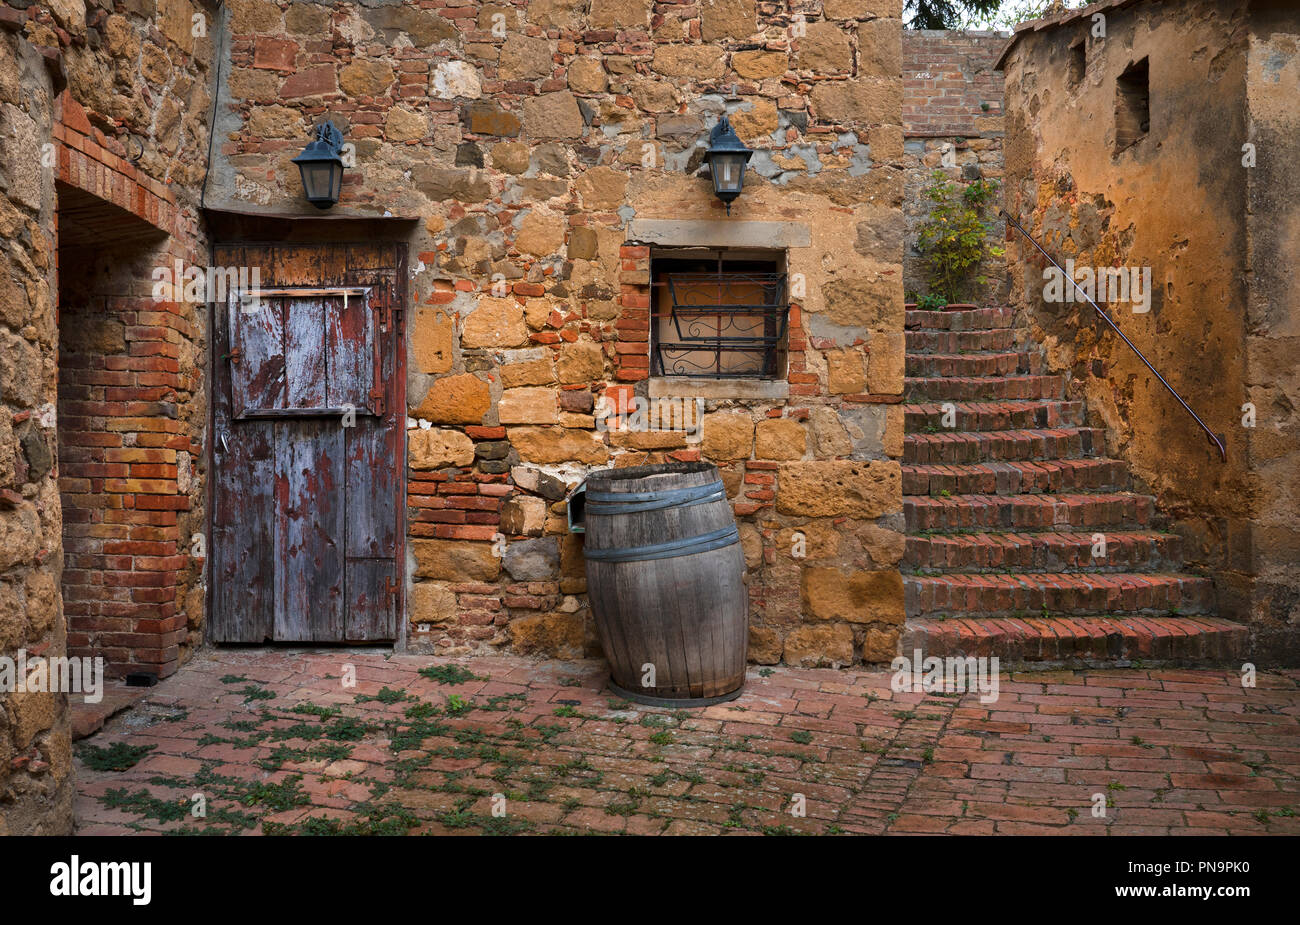 Old village scene with old wooden doors and barrels in village of Monicchiello,Tuscany,Italy Stock Photo